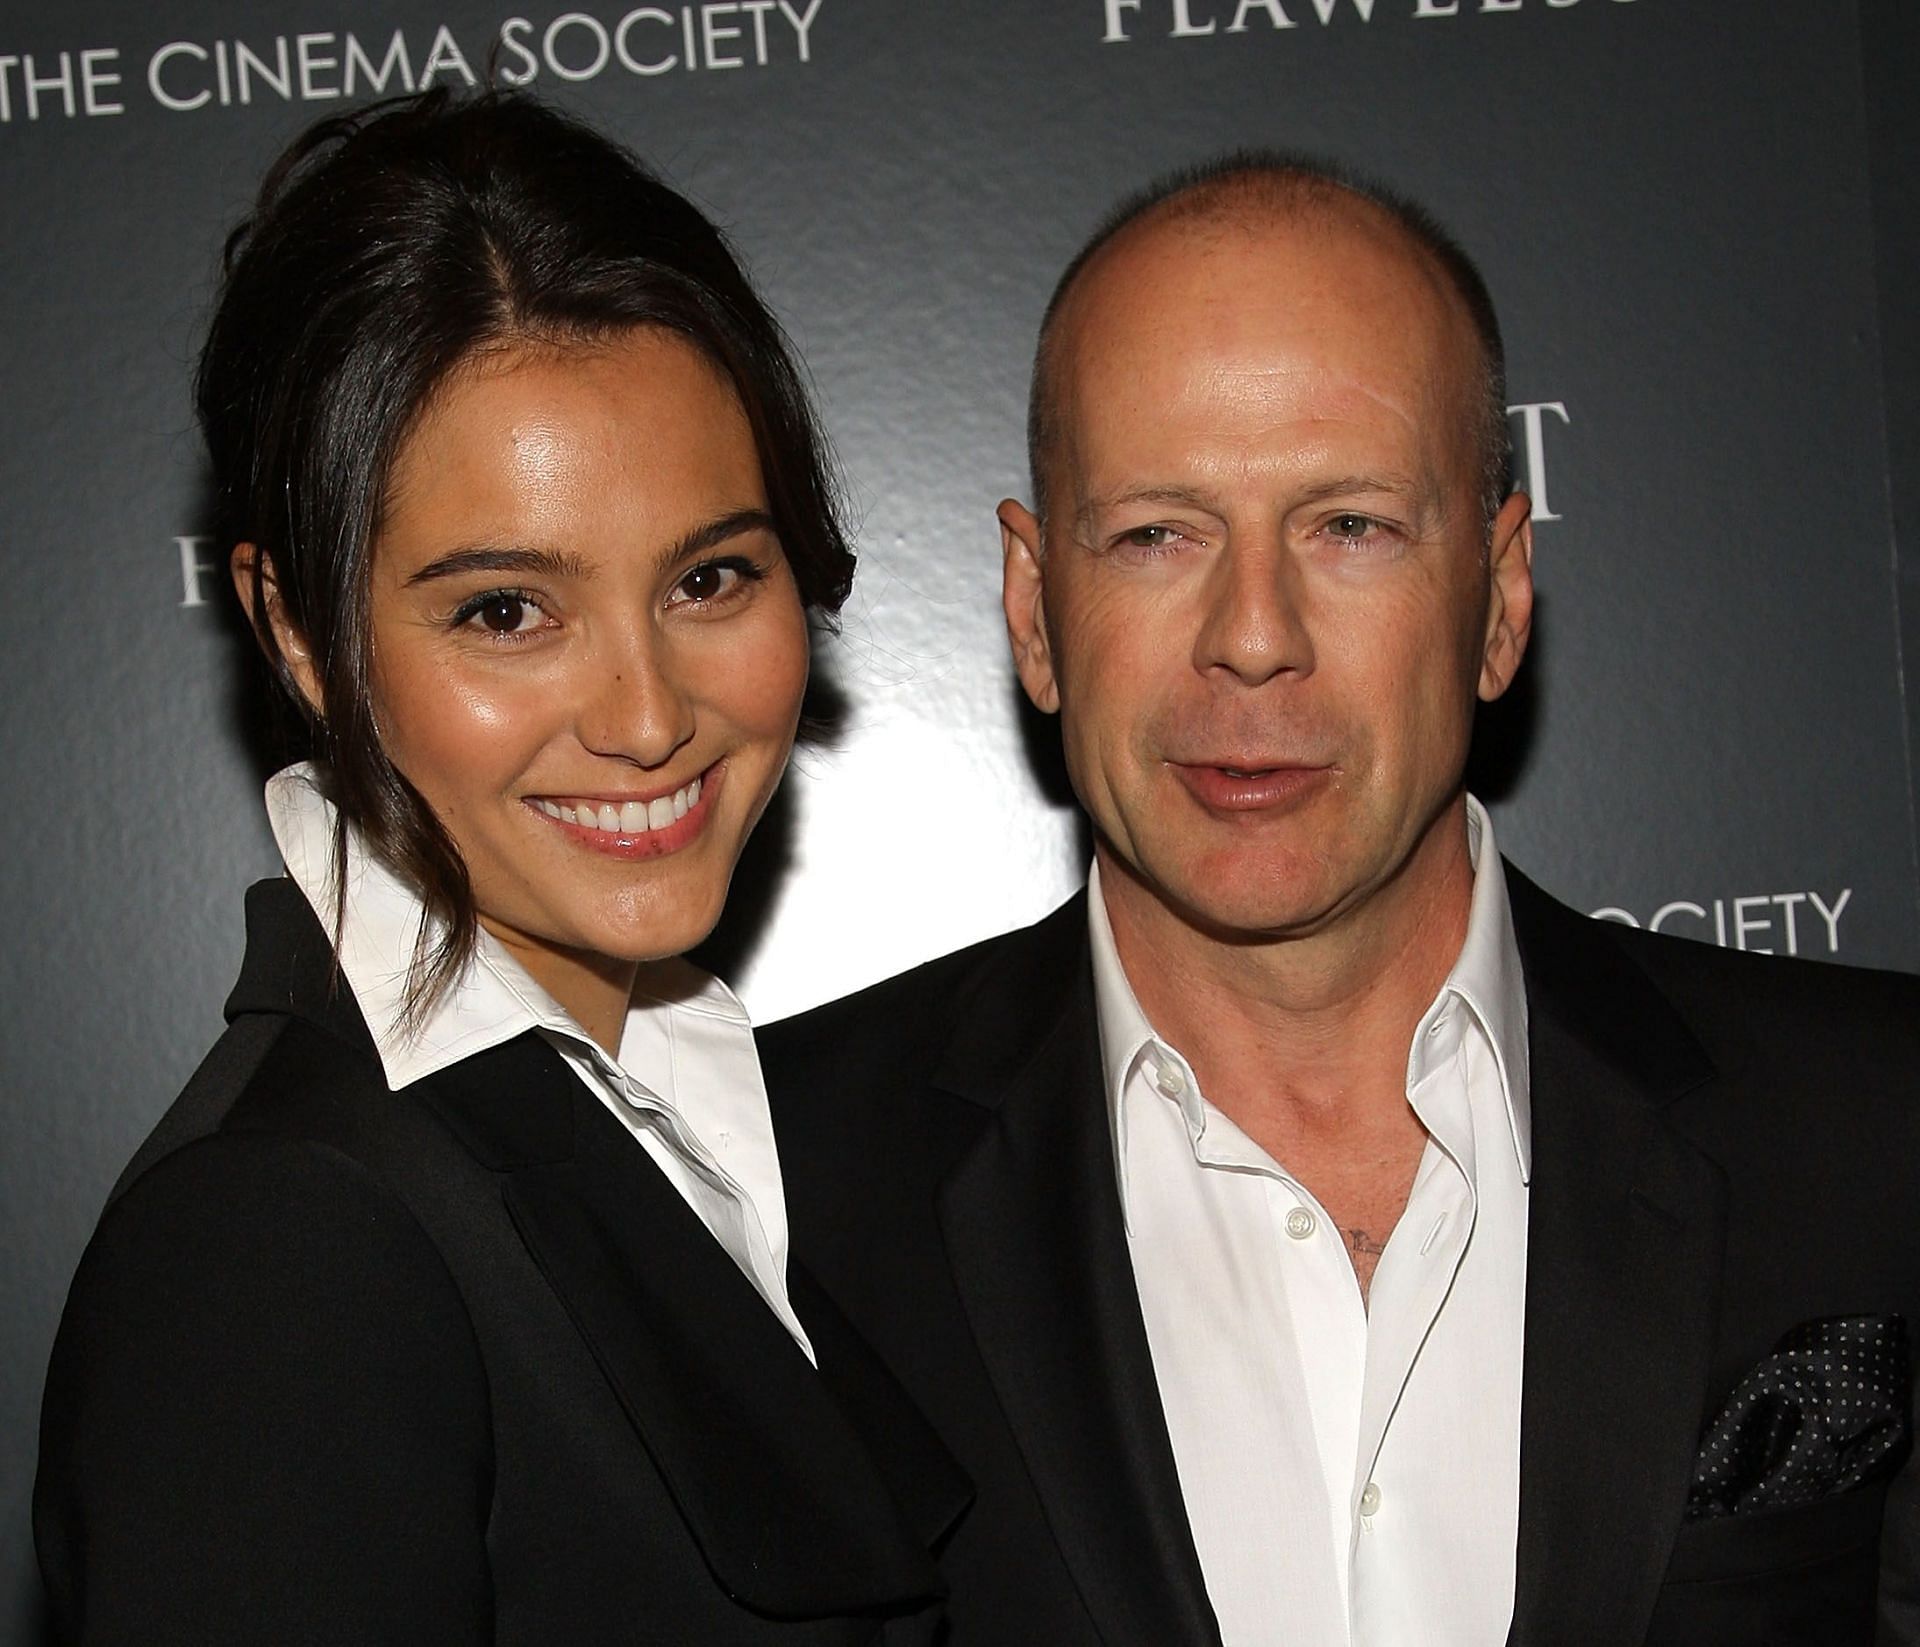 Bruce Willis with wife Emma Heming Willis (Image via Access Hollywood)